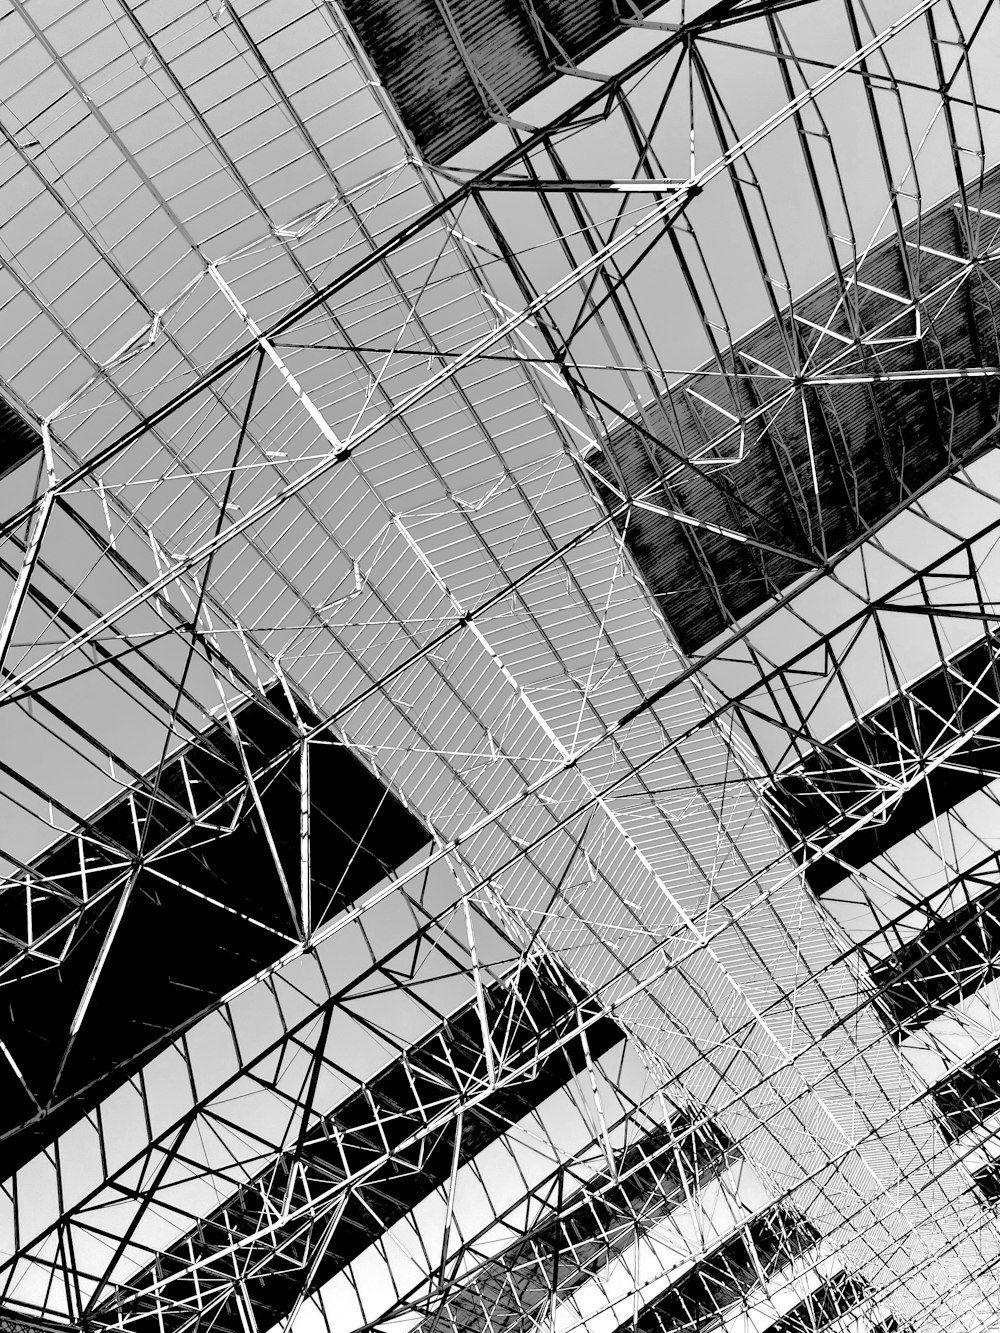 a black and white photo of some kind of structure